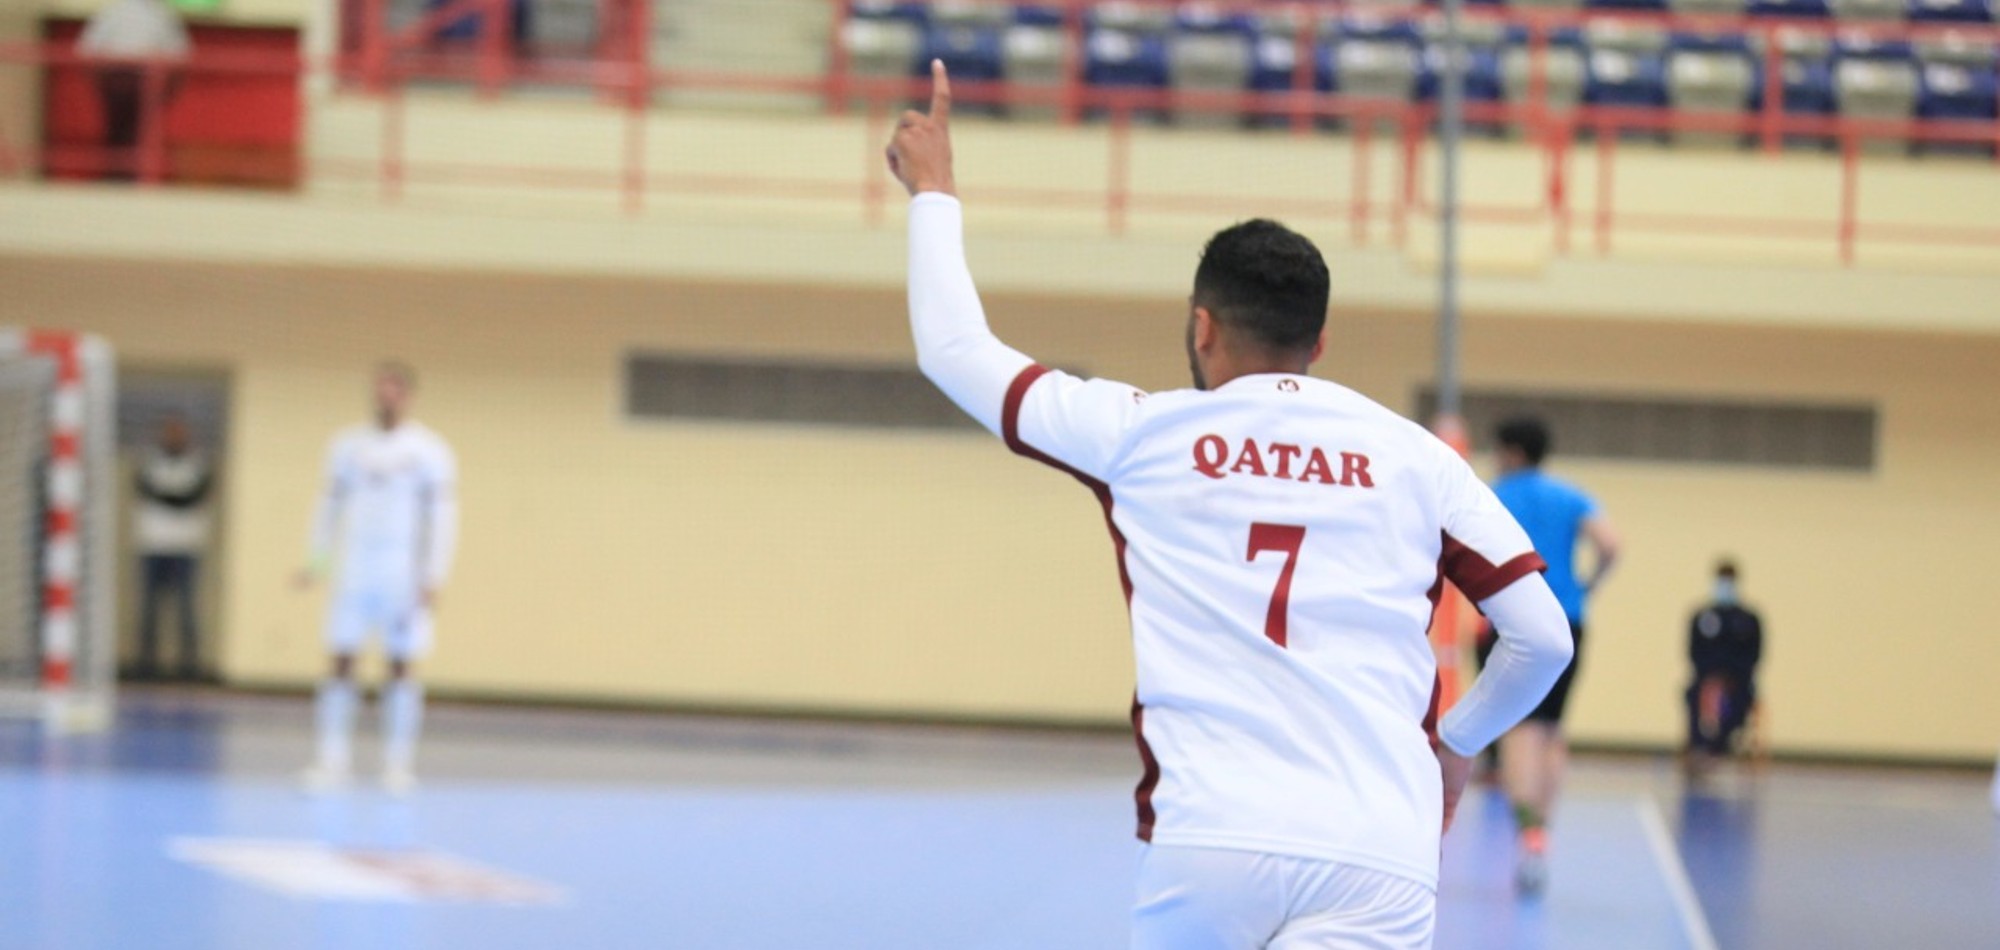 Qatar triumphs Oman in Group C of the Asian Men